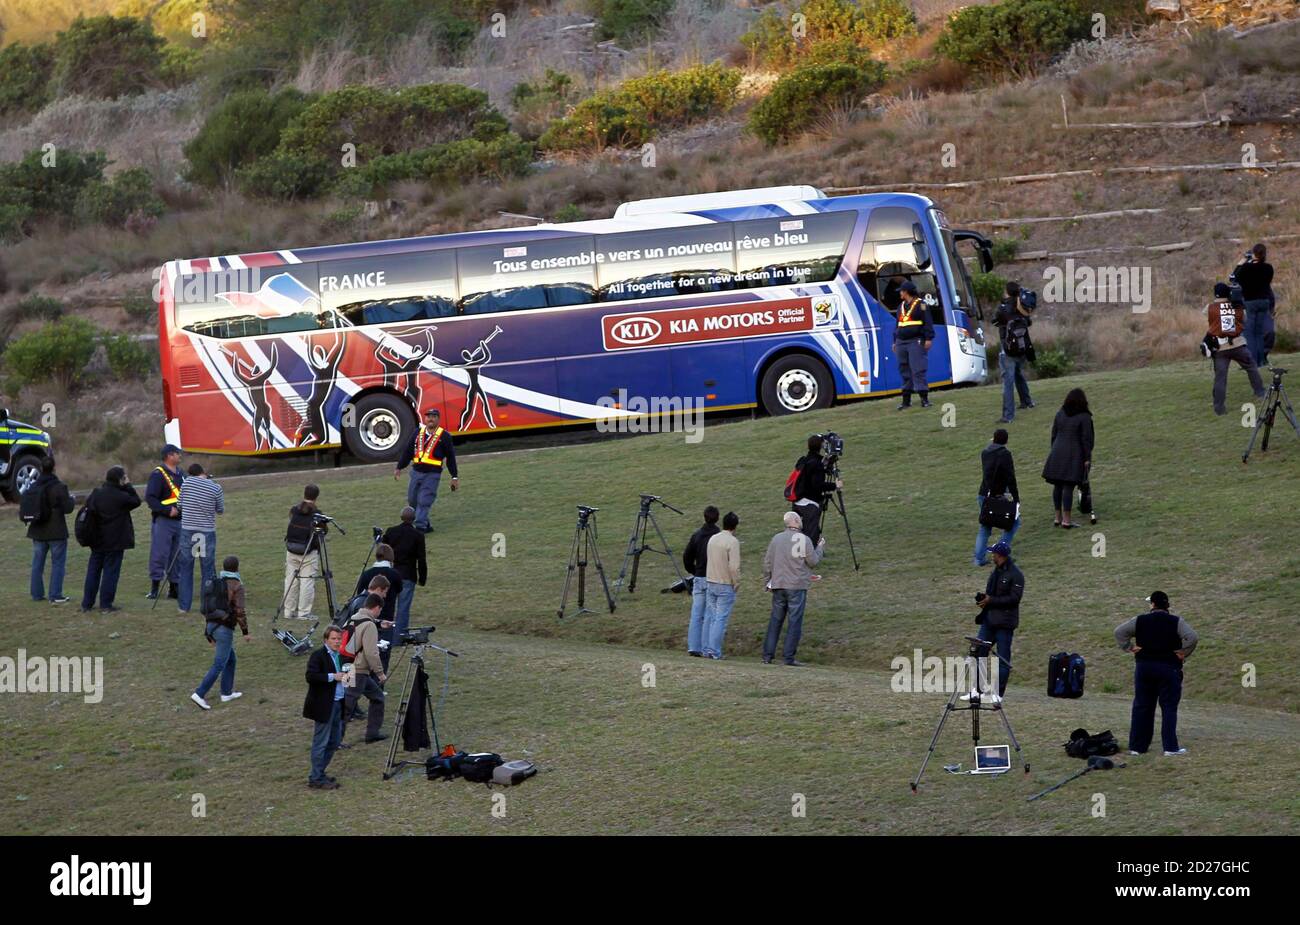 France's national soccer team players leave by bus after deciding not to  take part in a training session in Knysna, near Cape Town June 20, 2010. A  day after Les Bleus' striker